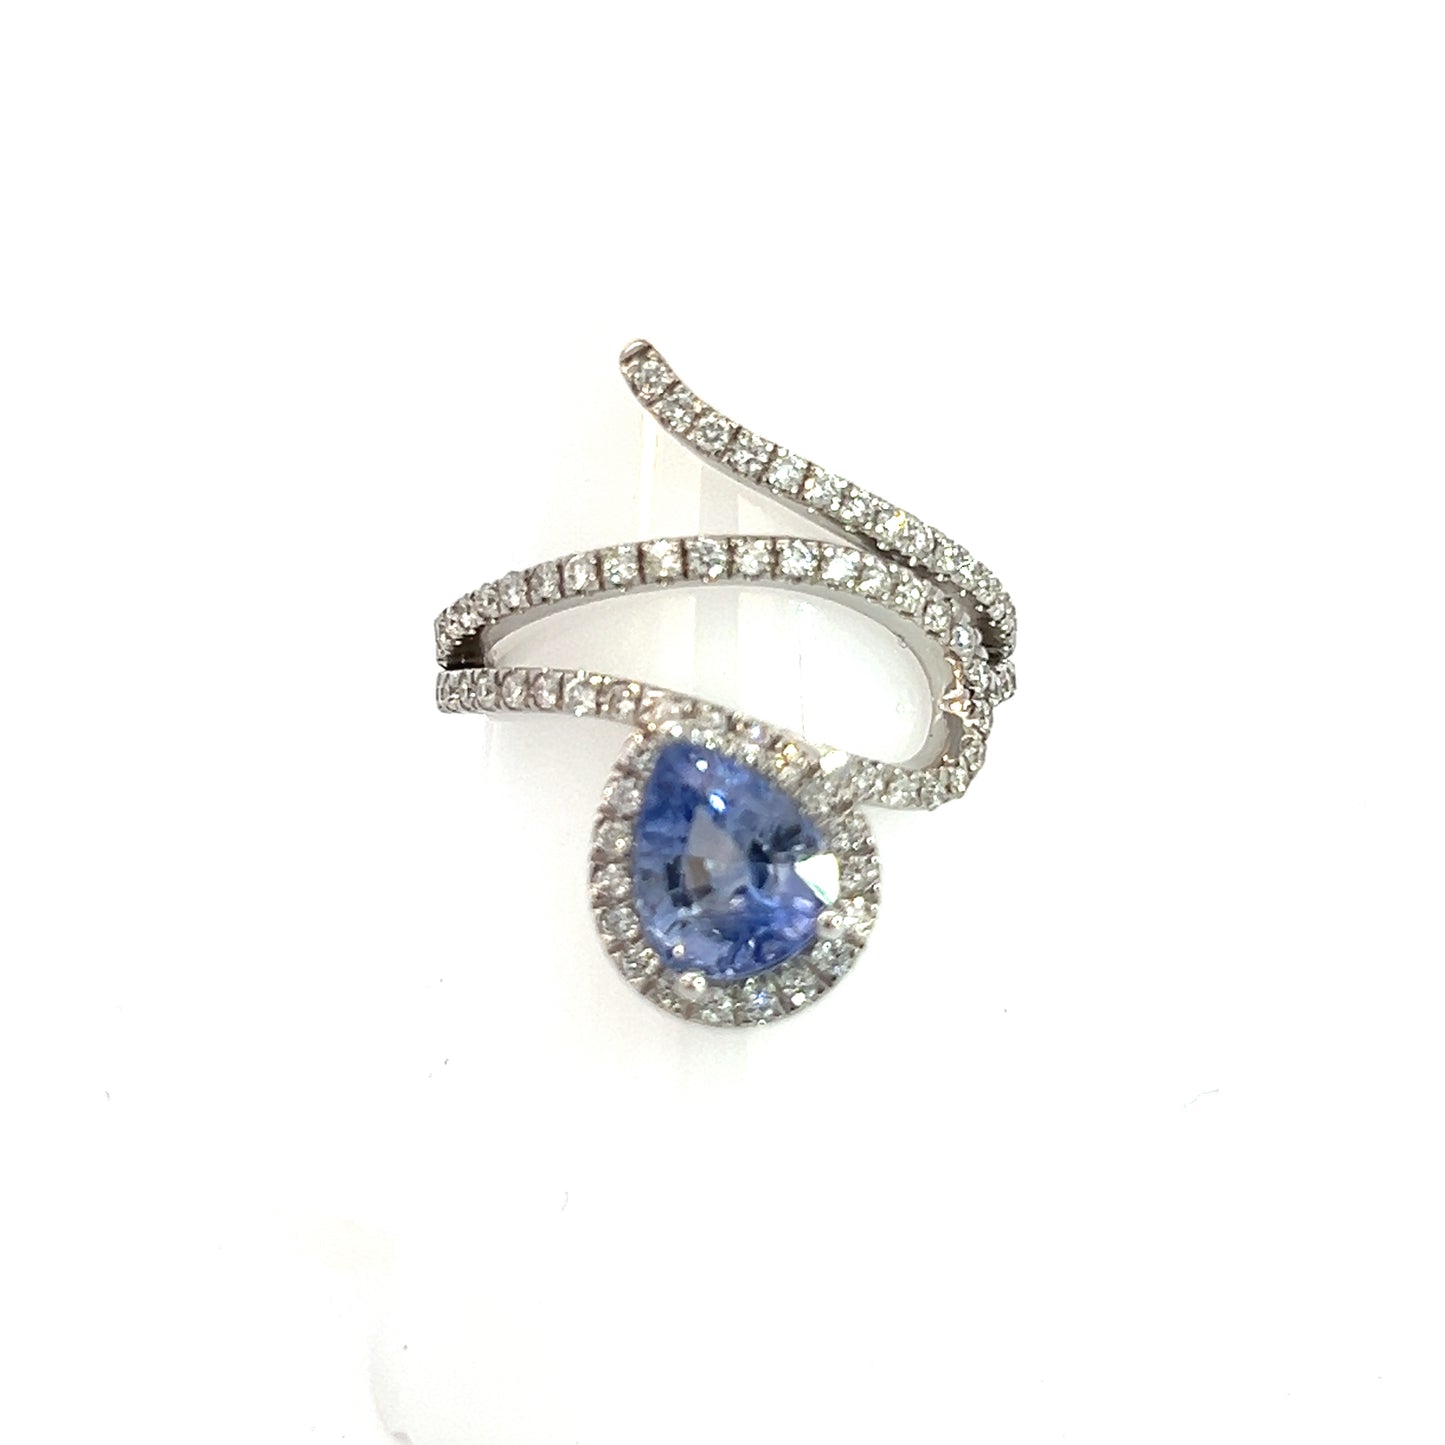 Natural Sapphire Diamond Ring 6.75 14k White Gold 2.86 TCW Certified $4,950 310655